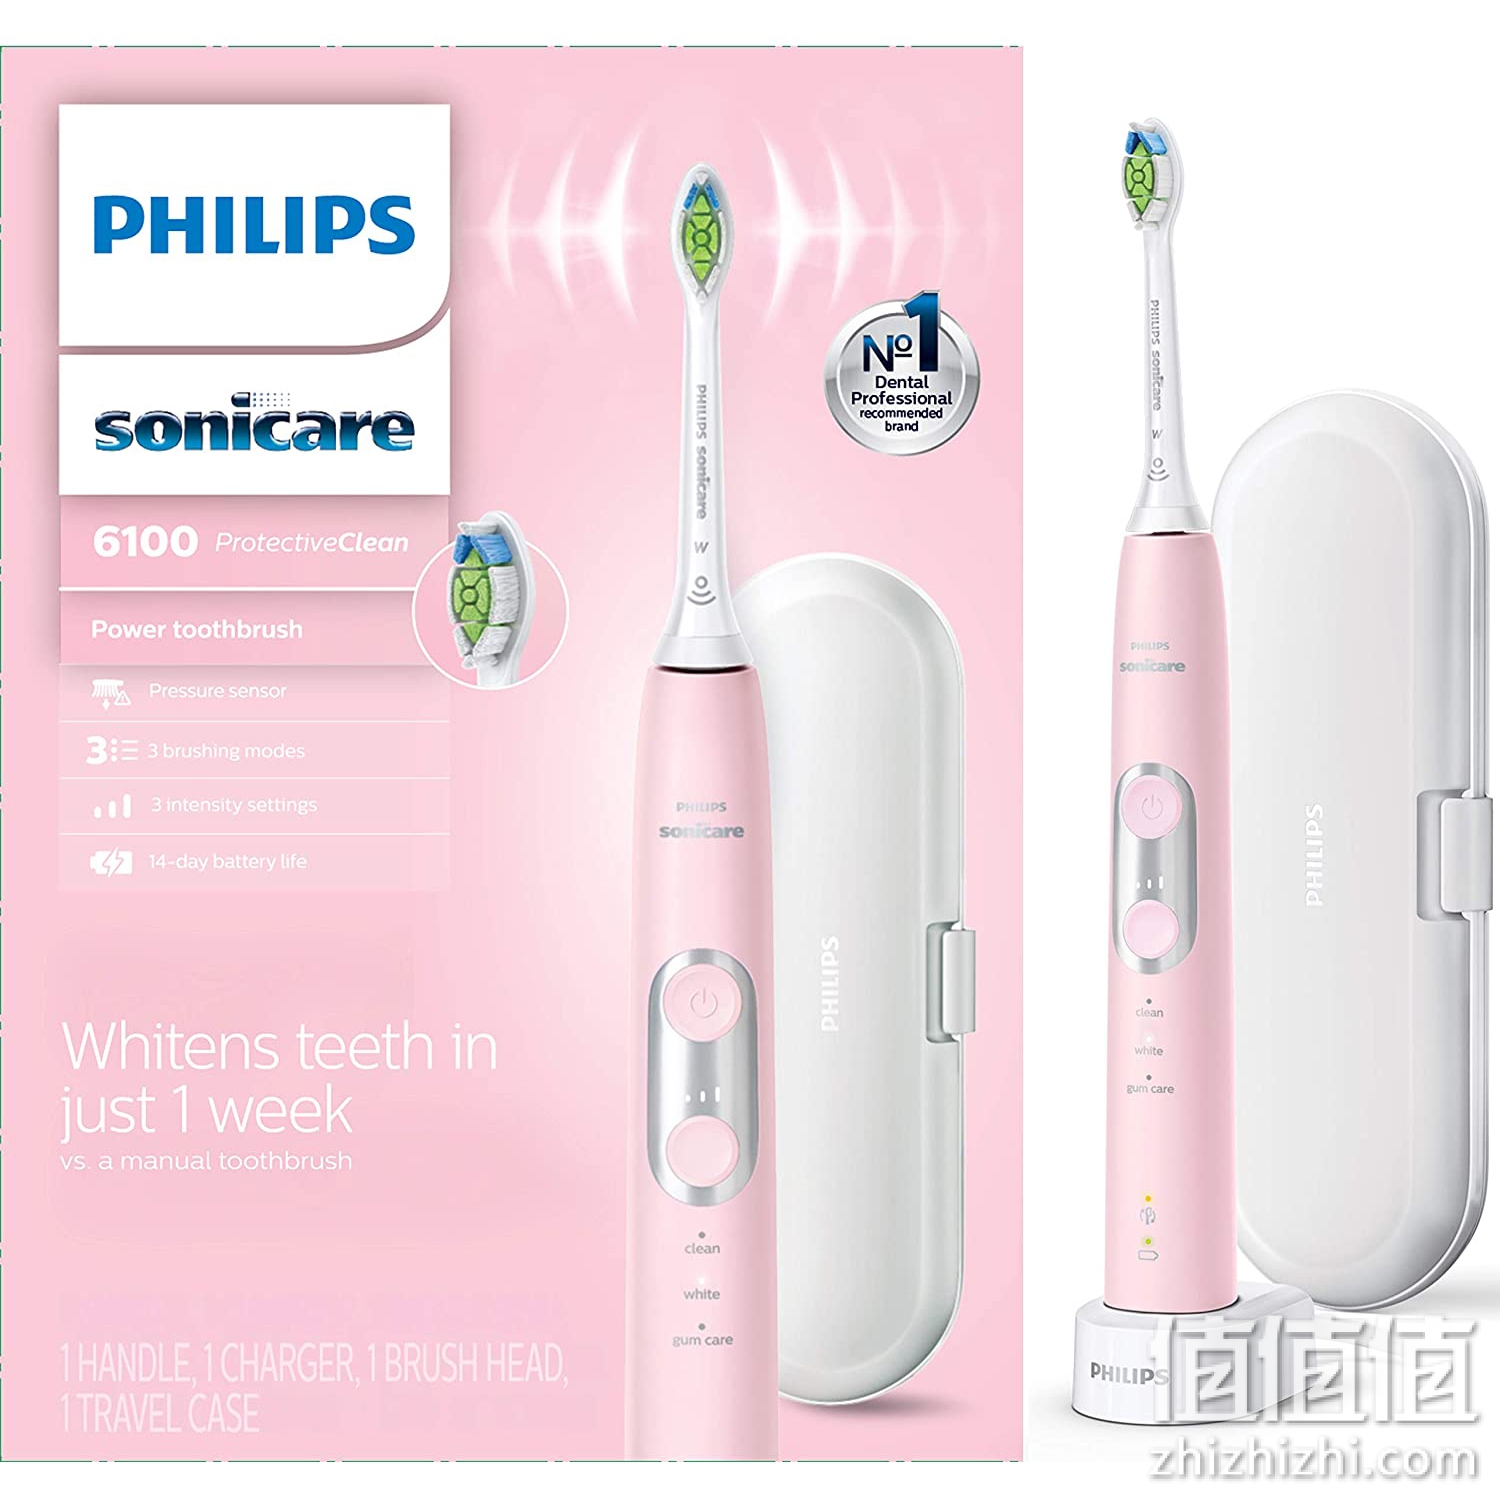 Philips Sonicare ProtectiveClean 6100 Rechargeable Electric Toothbrush, Whitening, Pink